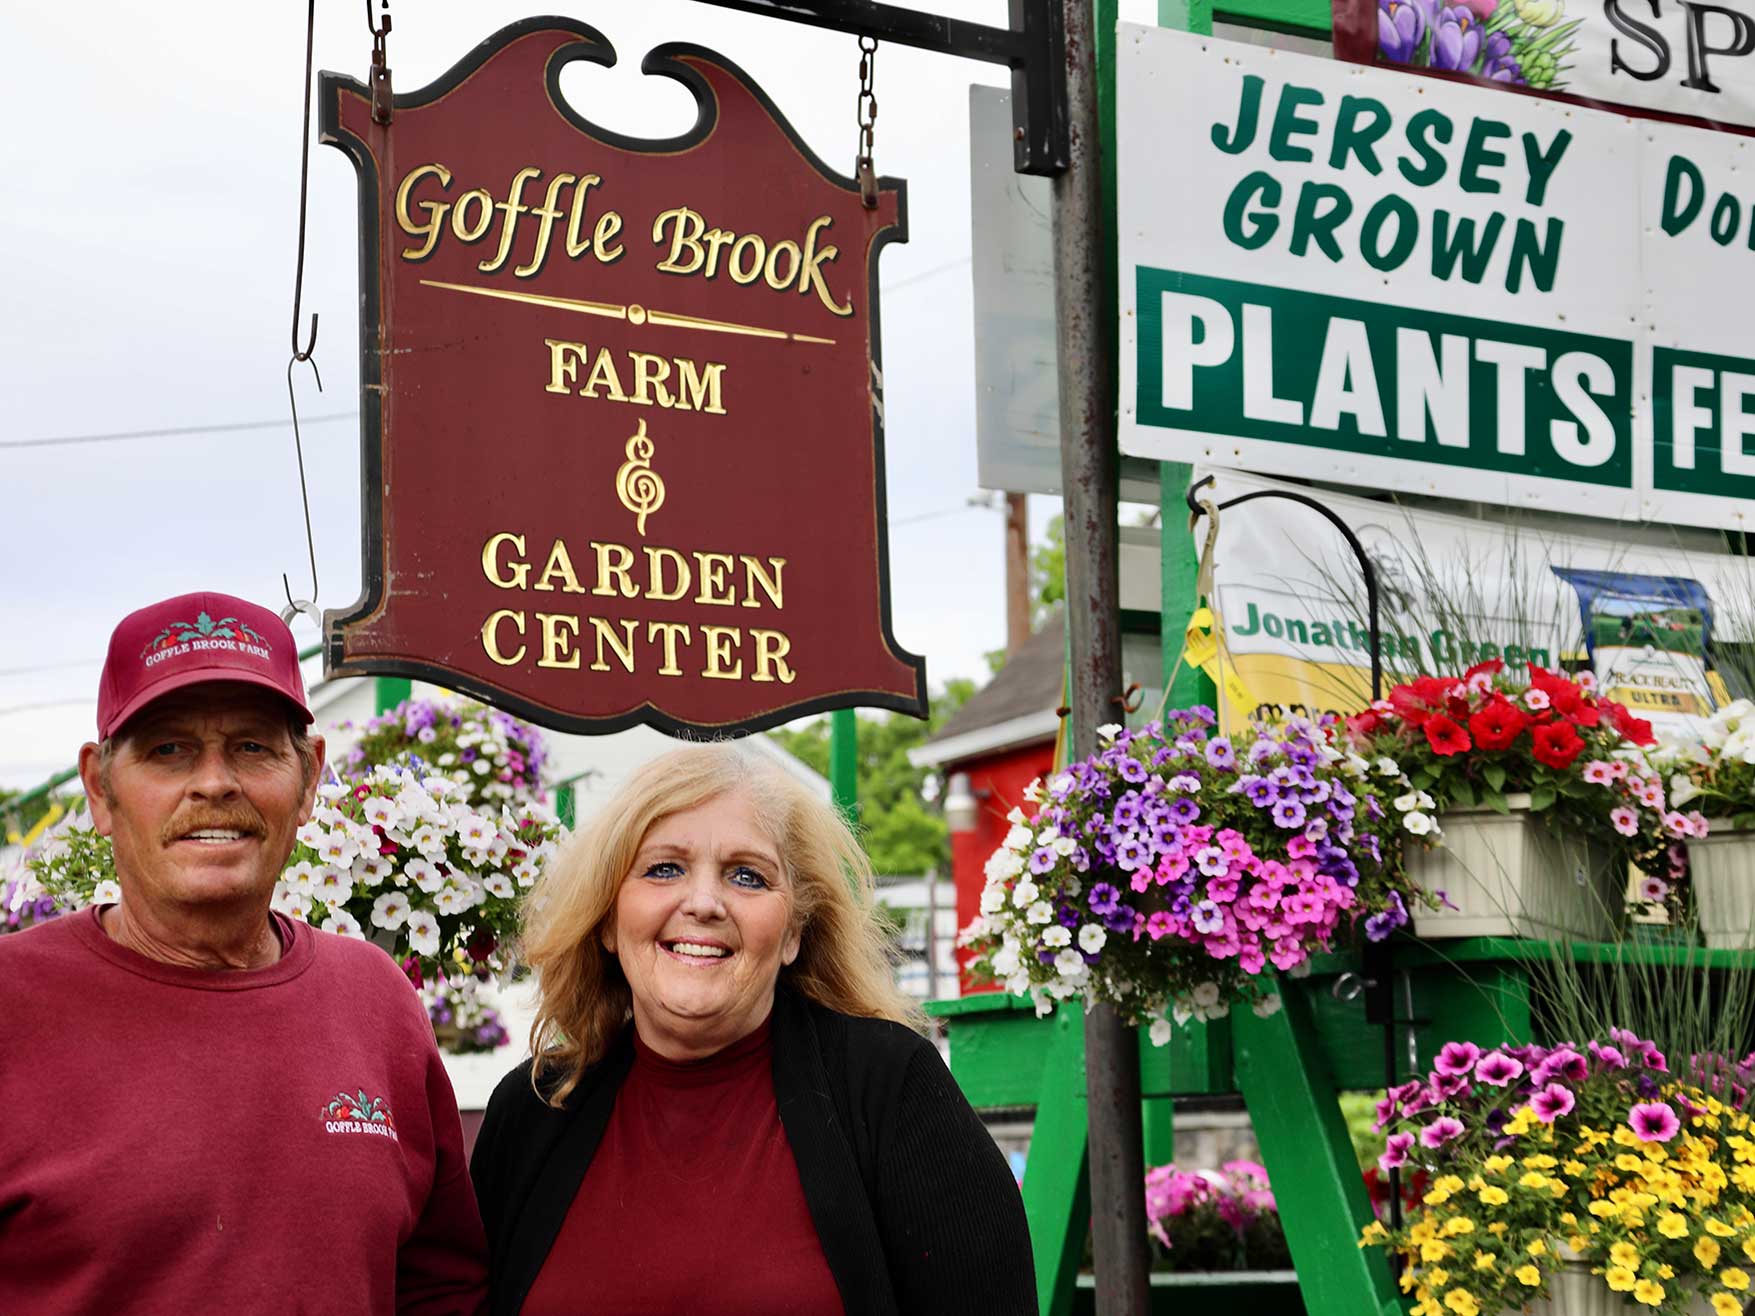 Goffle Brook Farms, founded by Richard and Dancy Osborne, first opened on May 1st, 1968, and for the 54th straight year locals know that in addition to our plants, flowers and garden products in our Garden Center, we also have seasonal produce available in our Farmer’s Market. 